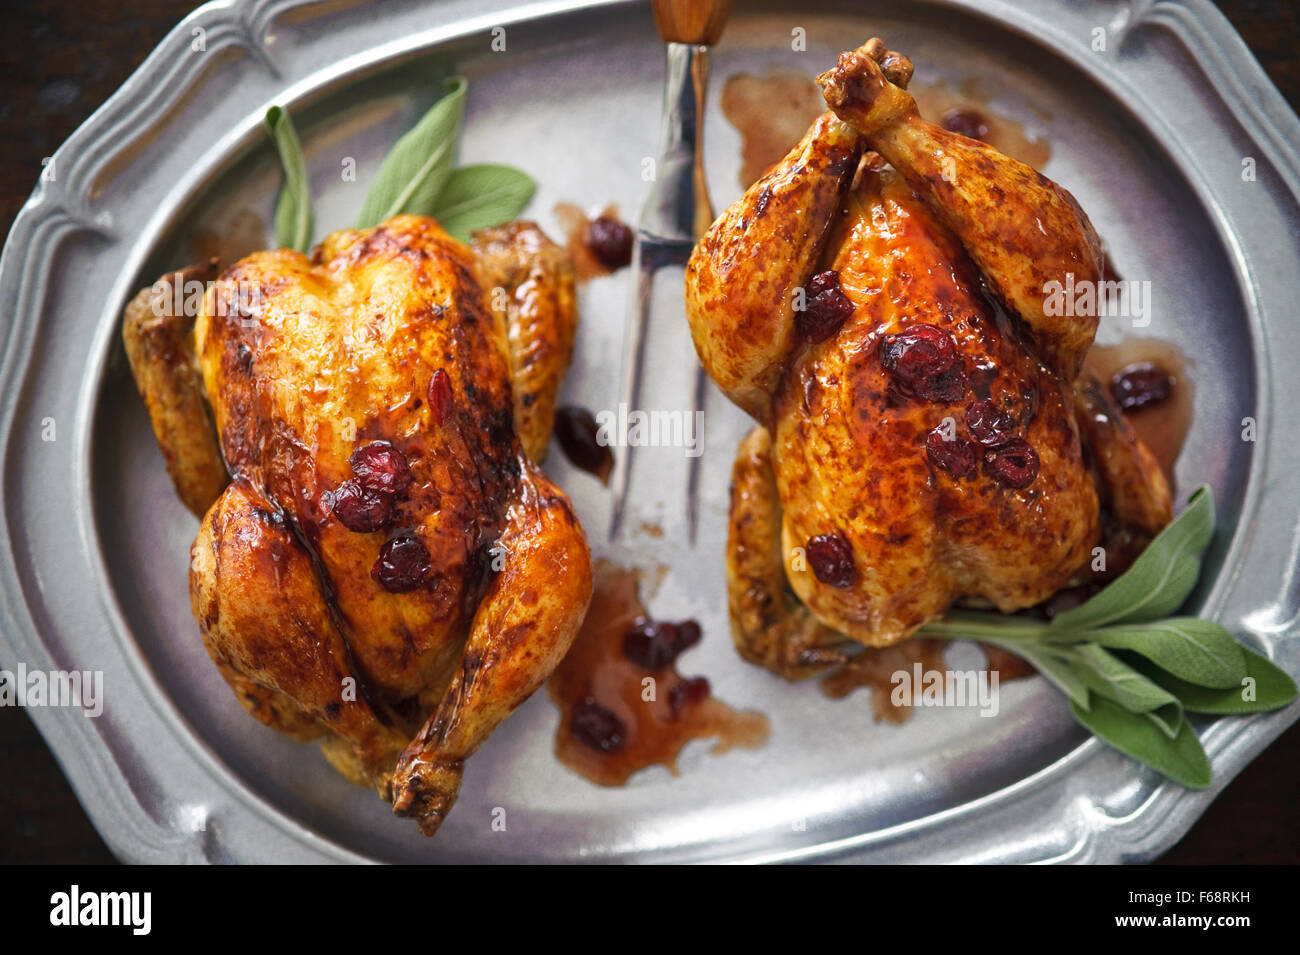 Pair of Cornish game hens roasted in cranberry sauce. Stock Photo